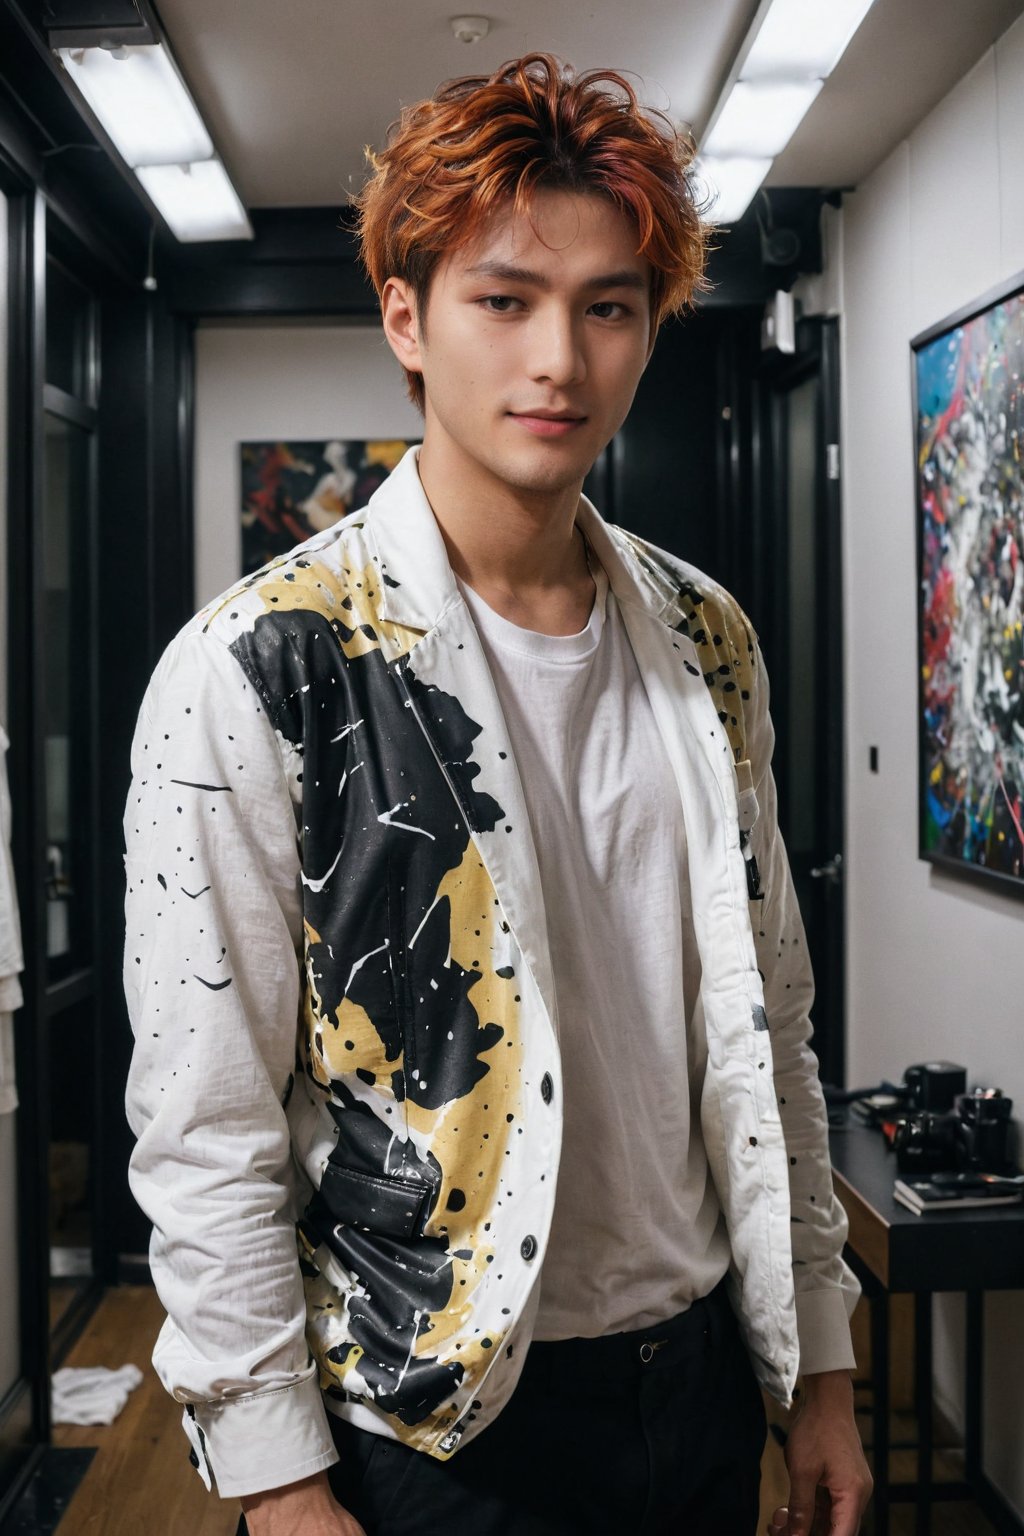 Hasselblad photo portrait of a handsome and mysterious Tokyo young male model, wearing urban clothes inspired by Jackson Pollock, creating the most incredible 2018 fashion look possible. The setting is a clear house with colorful paintings, an astonishing lighting ambiance. The man is standing with an intense look, short haircut, with lots of 12k contrast, many original details. The scene is epic, artistic, with light skin and detailed features. He is facing away from the camera, looking back with a big smile, using a Givenchy 100mm portrait lens. The lighting is golden and professionally captured by a natural light photographer.,hubgman